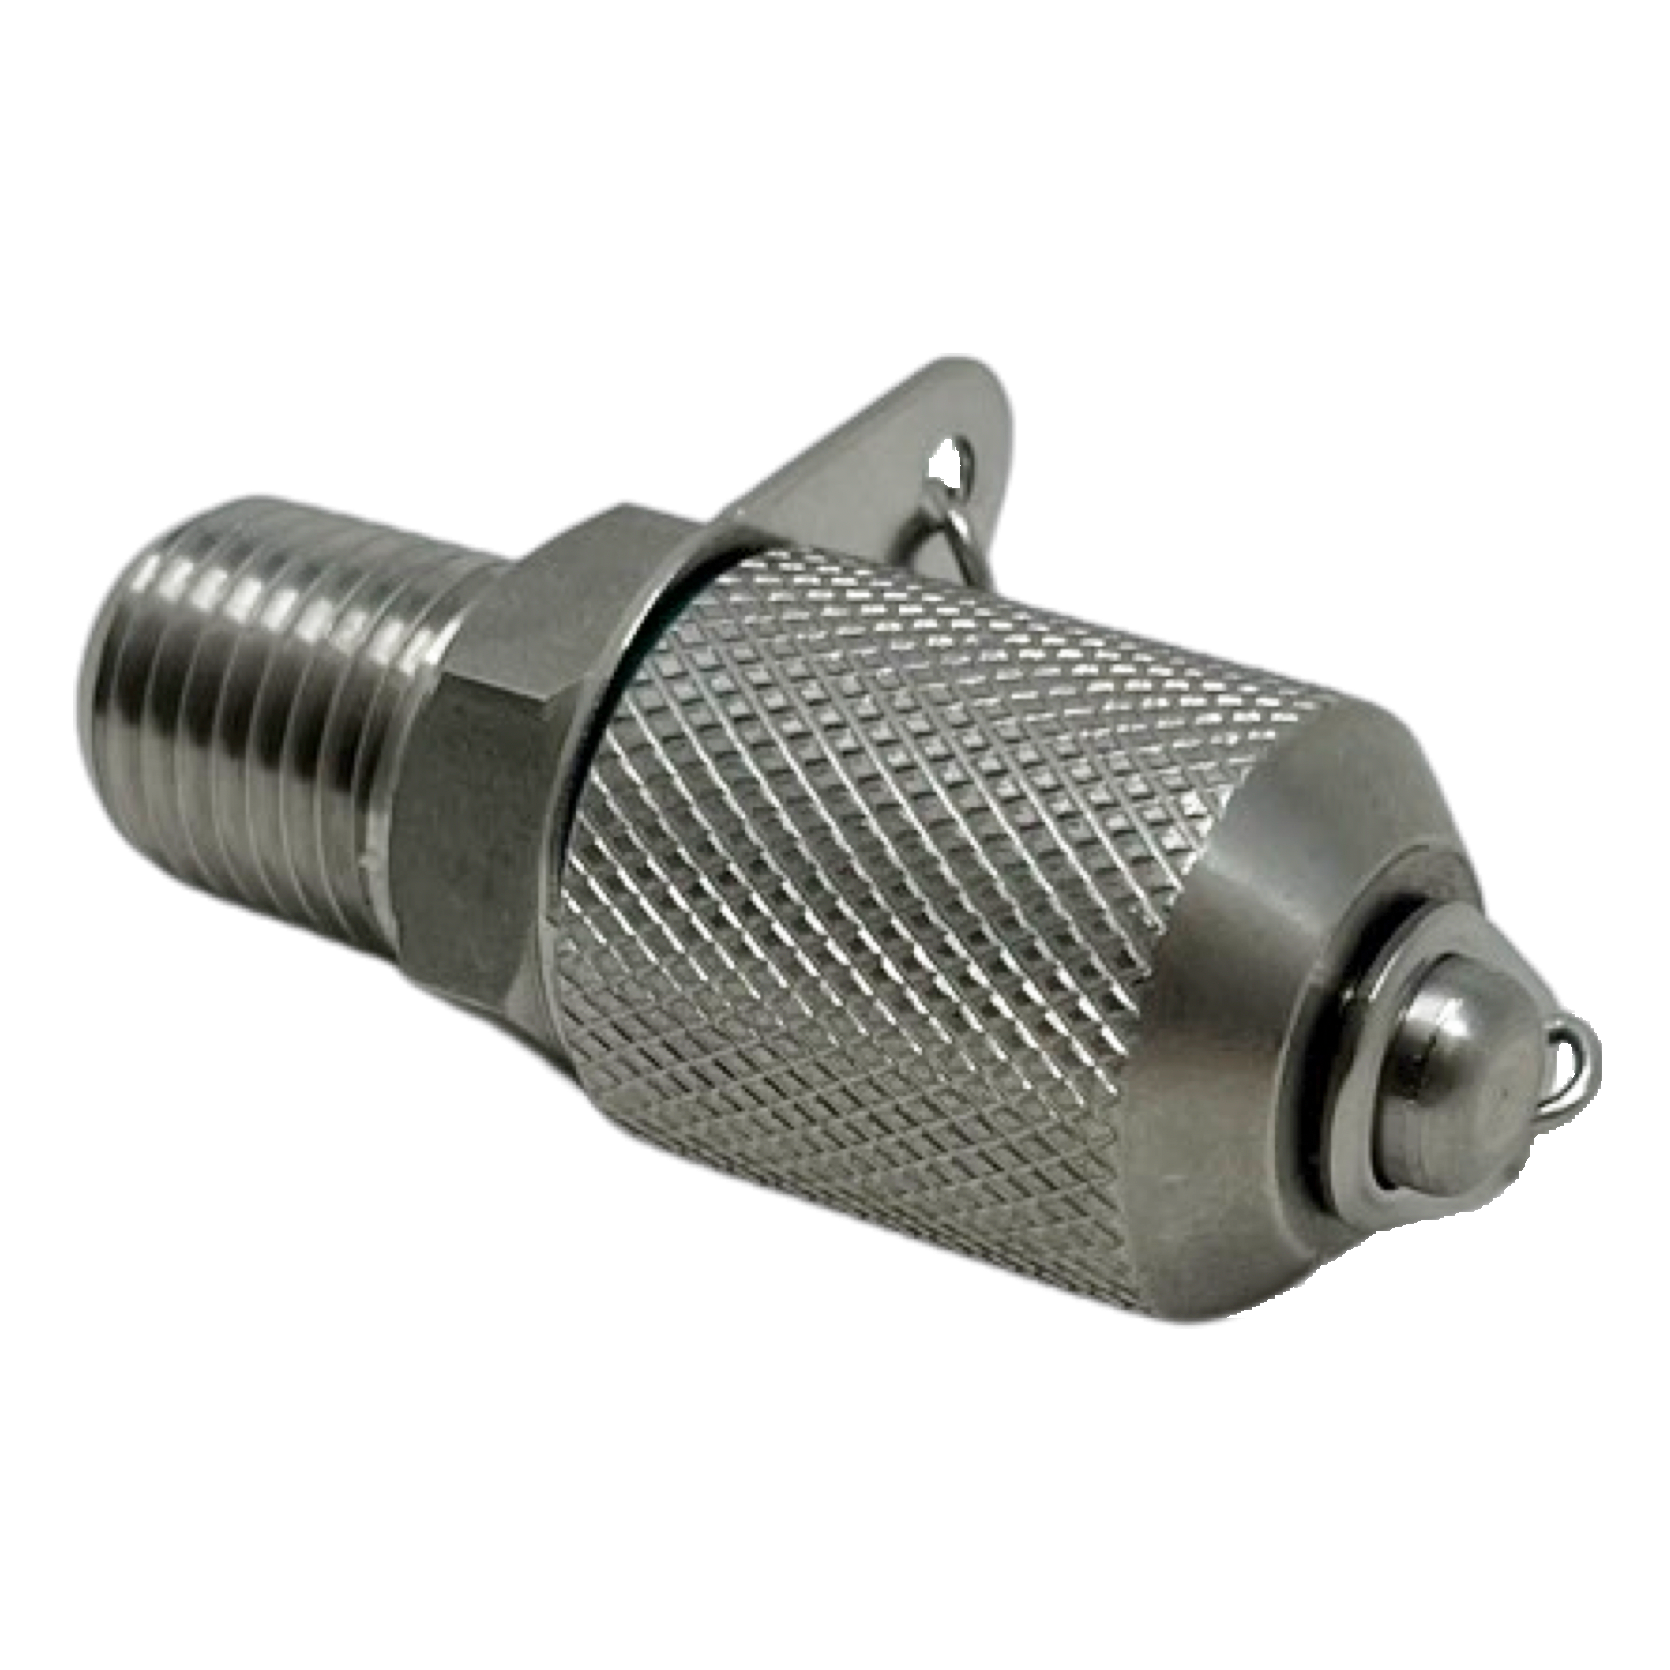 TPPM1620CBN1/4 : Anchor Test Point, 9000psi Rated, 1/4" NPT, Buna Seals, Zinc/Nickel Plated Carbon Steel